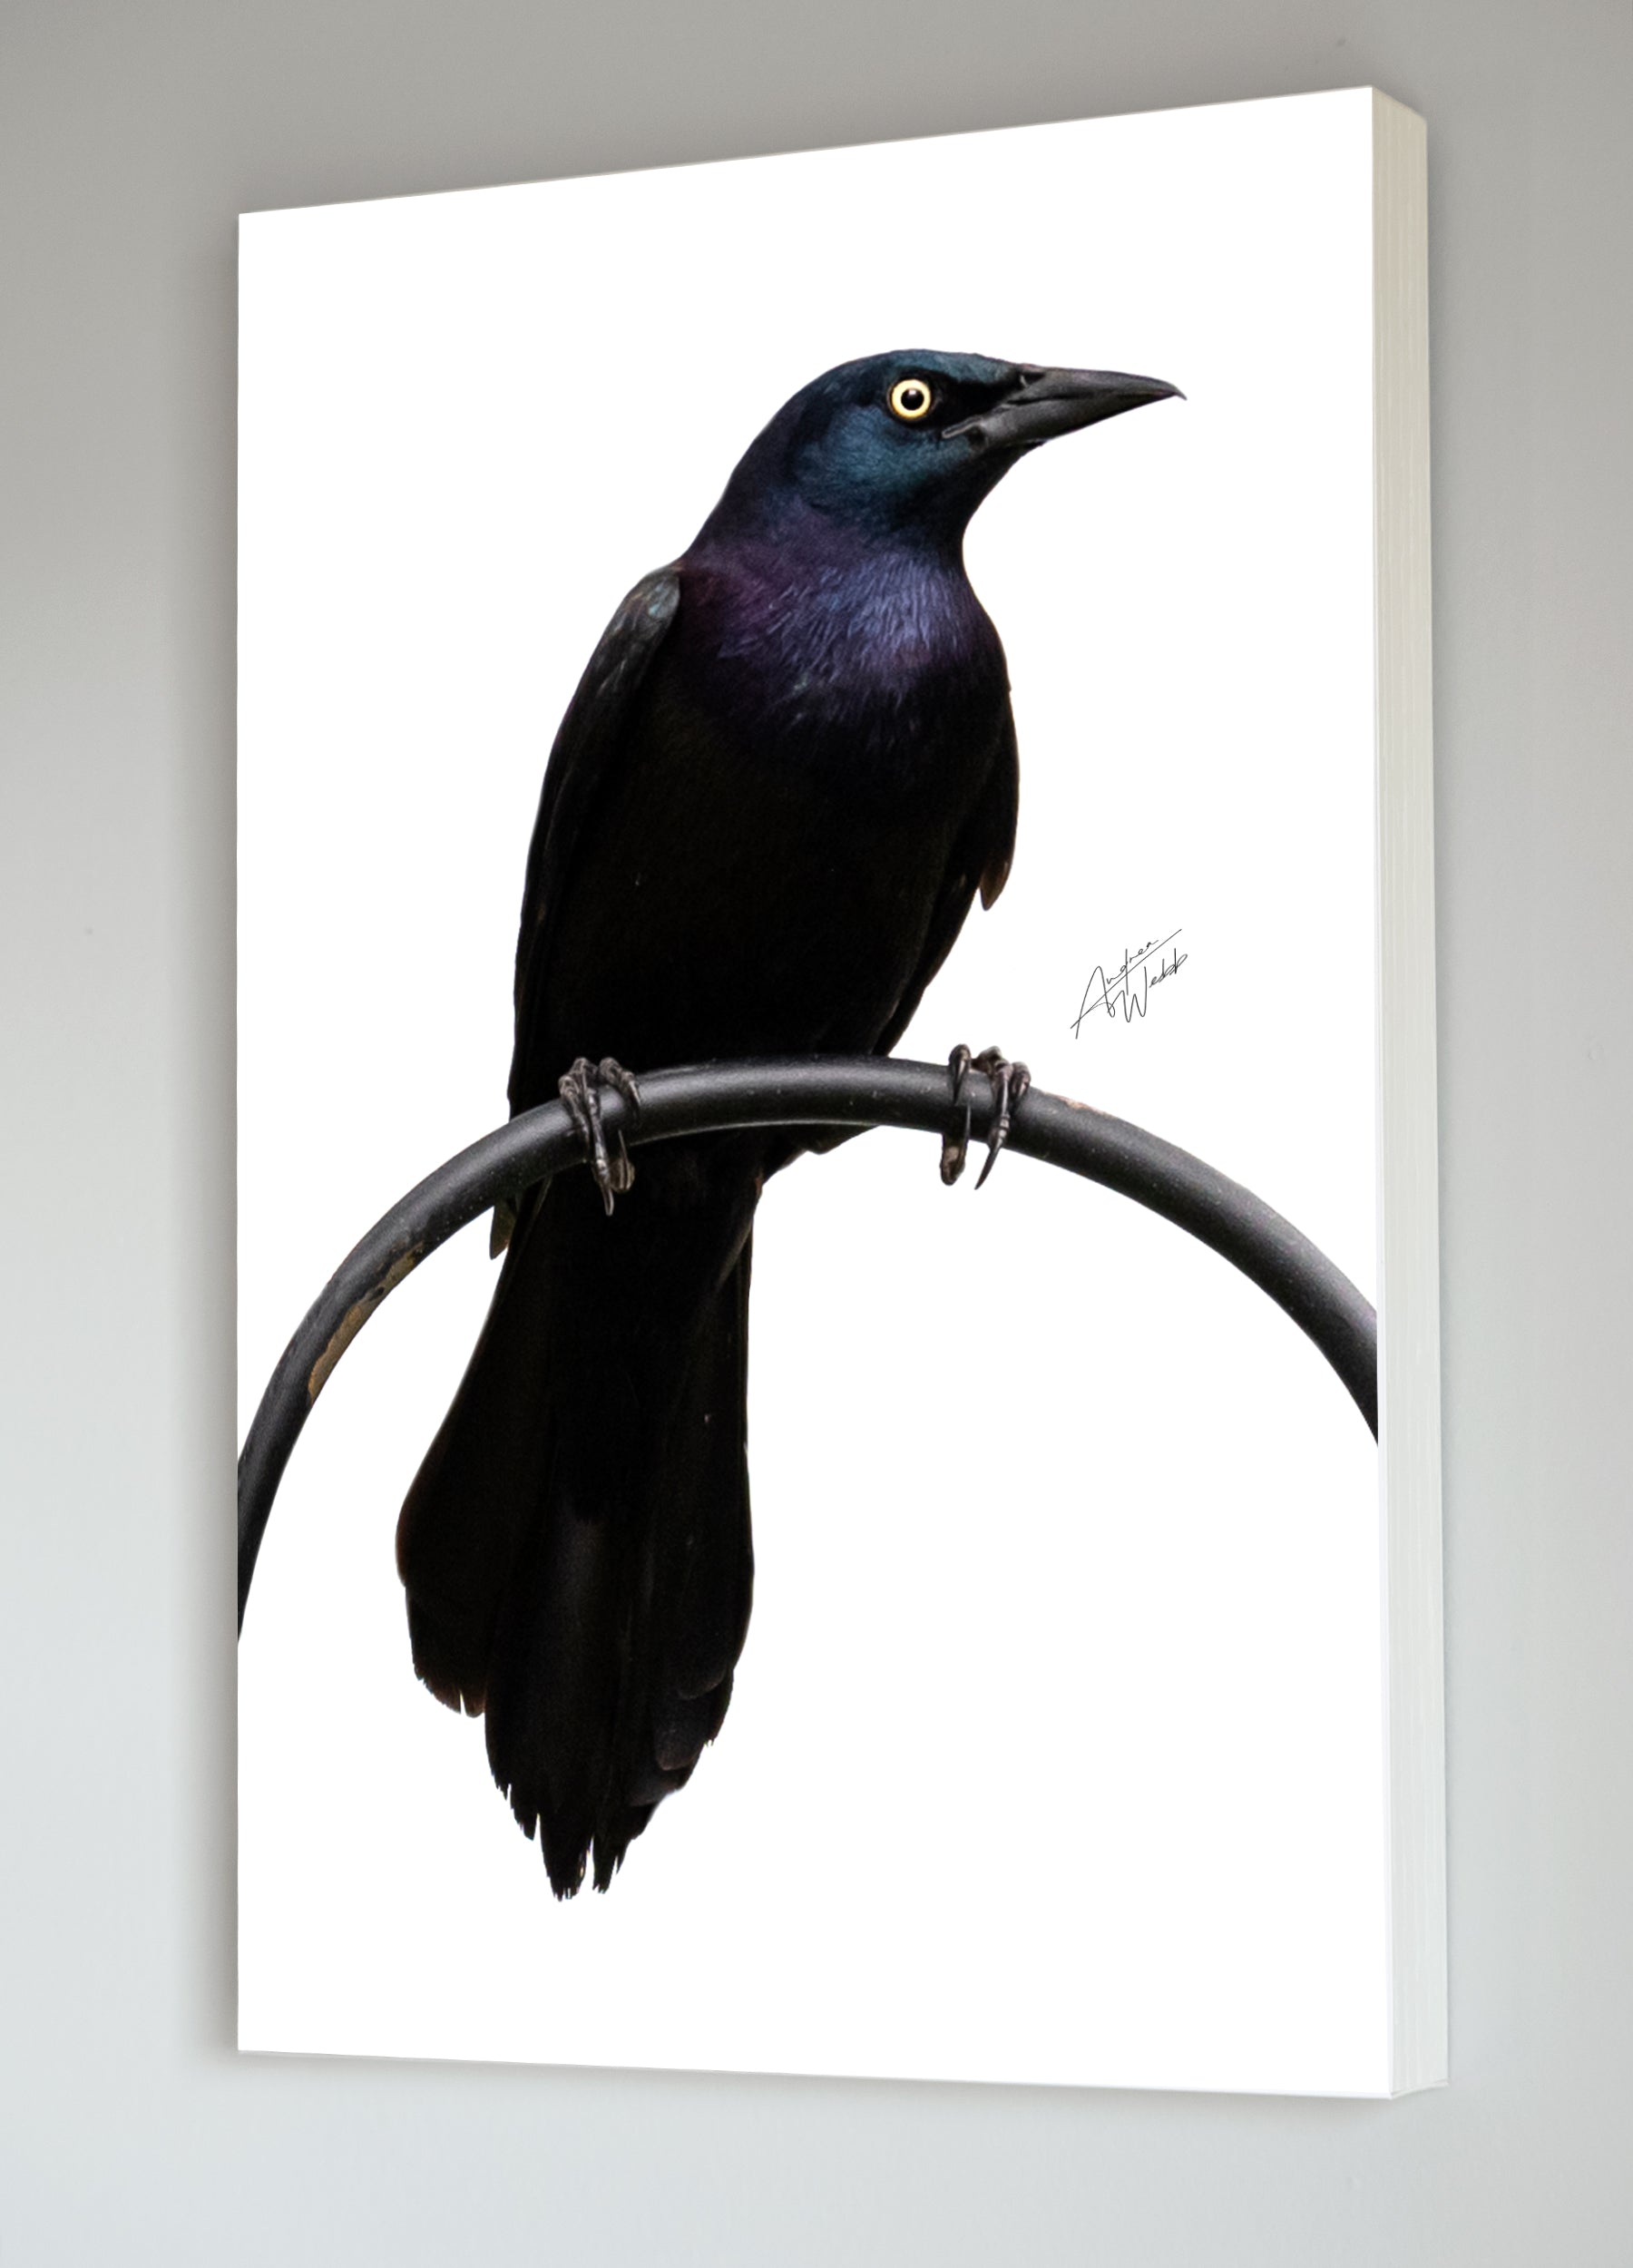 Common Grackle Bird on White Background Portrait, Common Grackle artwork, common grackle photography, common grackle photos, common grackle wall art, common grackle gifts, common grackle canvases